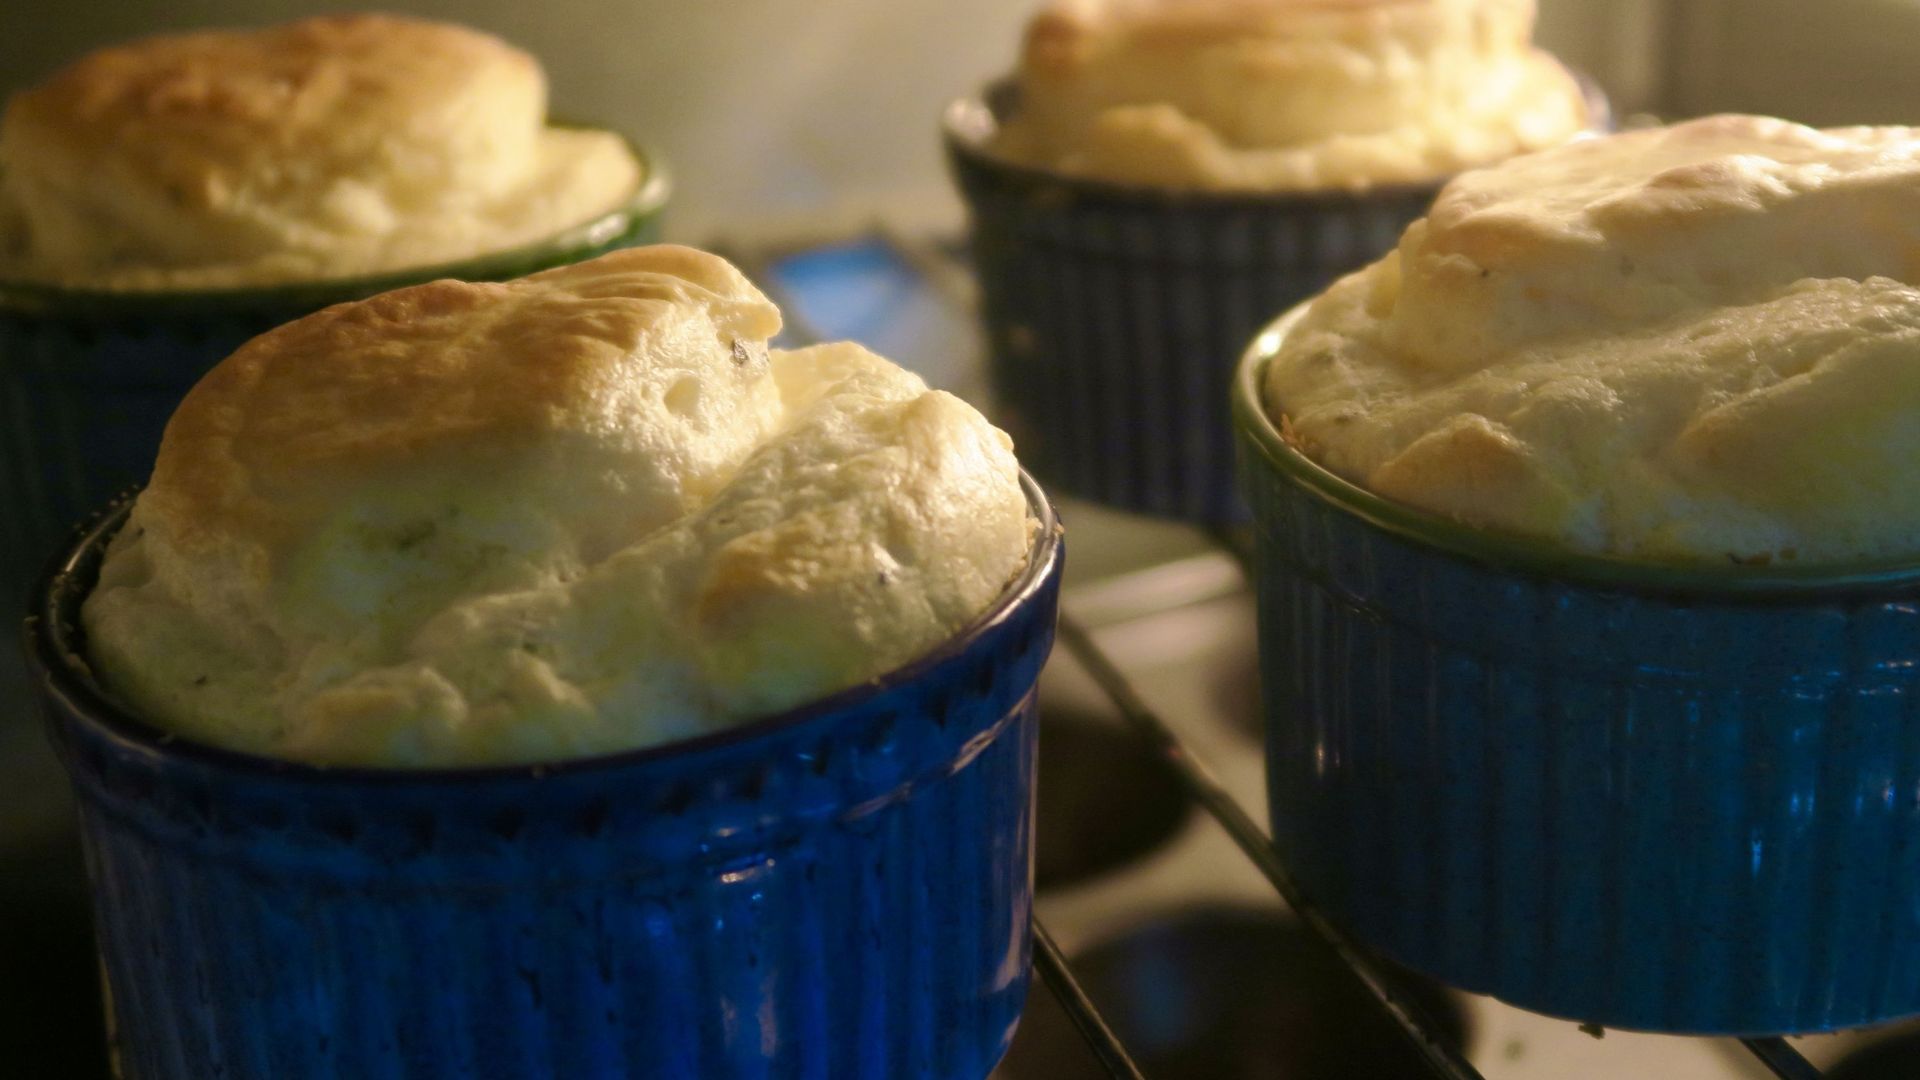 New Year’s Eve: What if we made the perfect soufflé thanks to science?